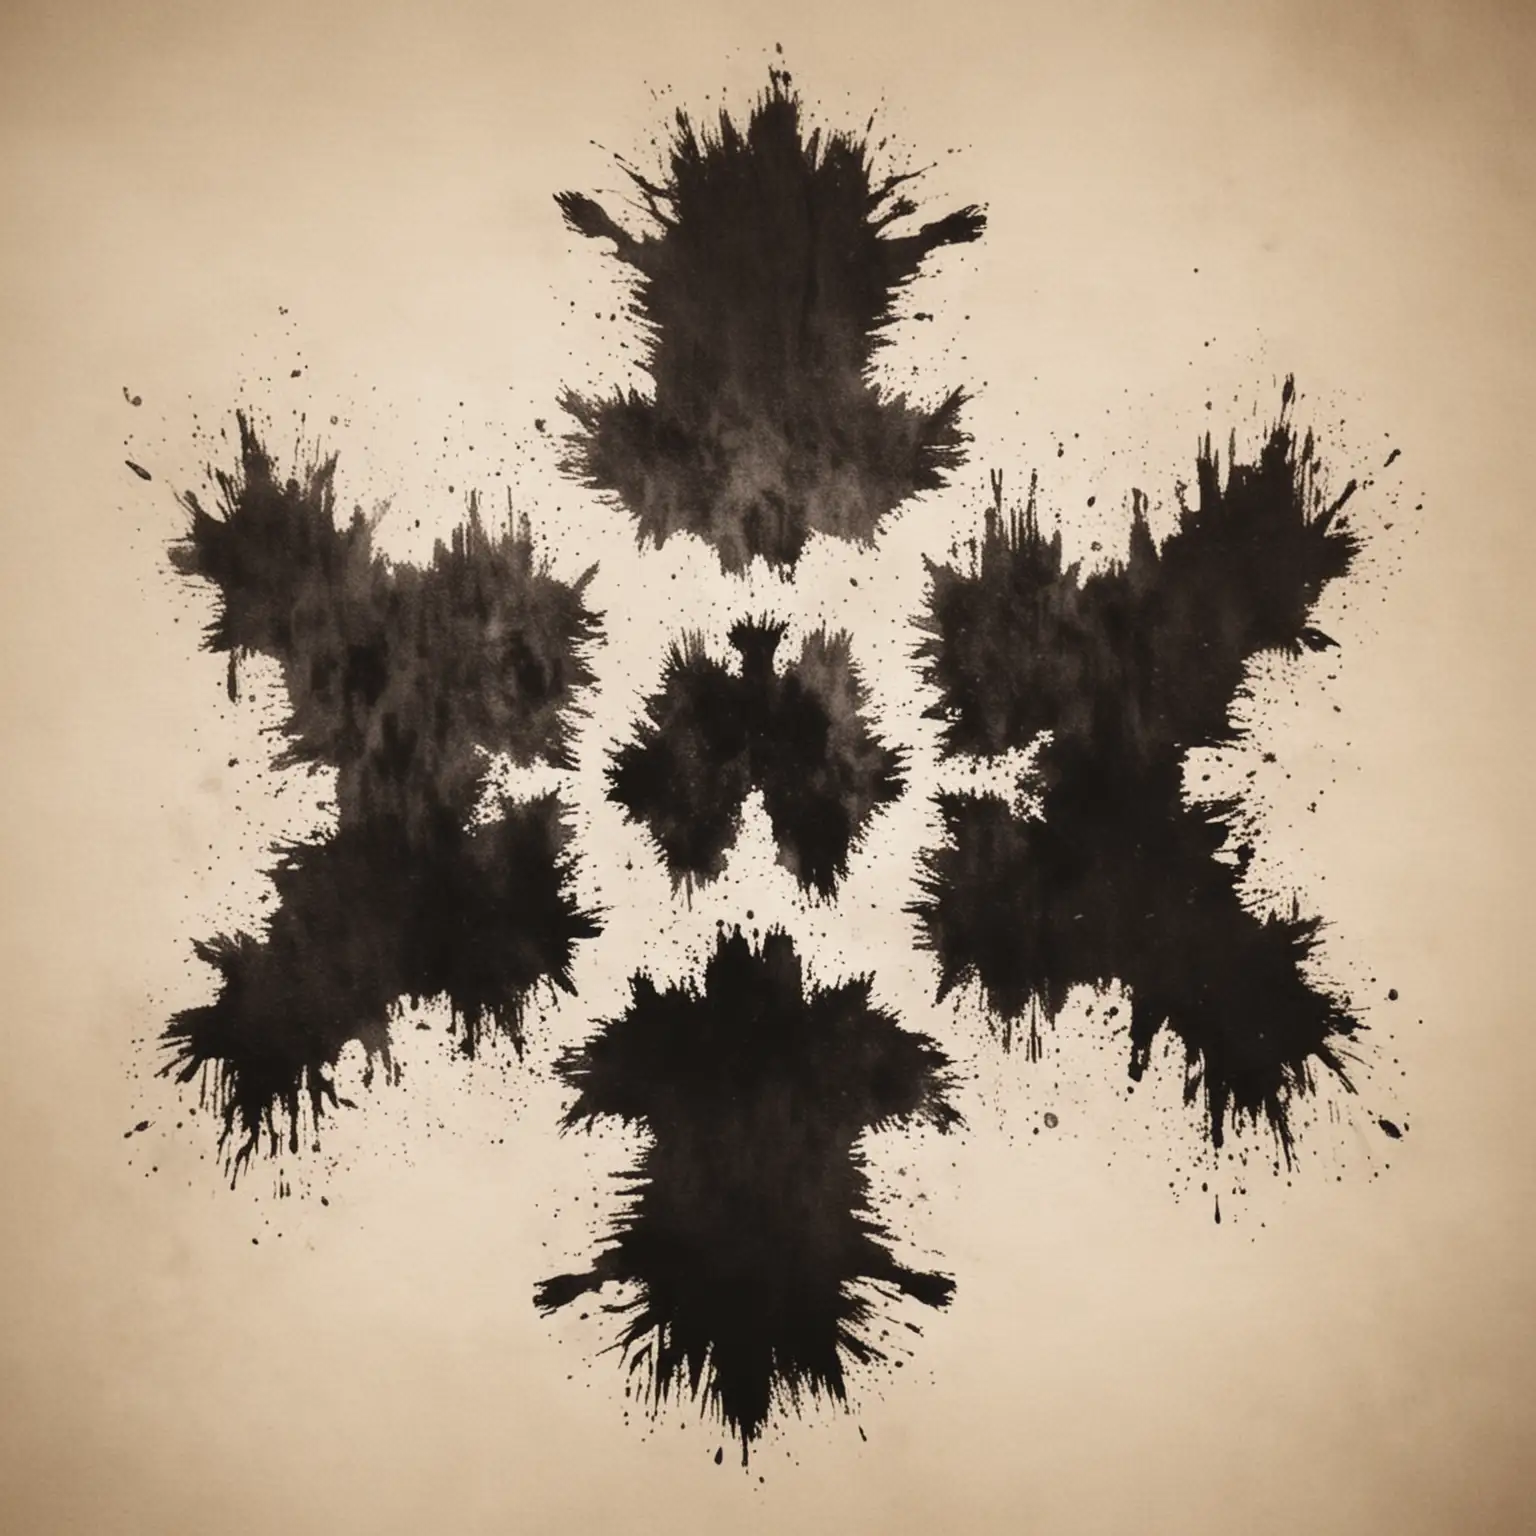 Abstract Ink Blot Artwork in Rorschach Style